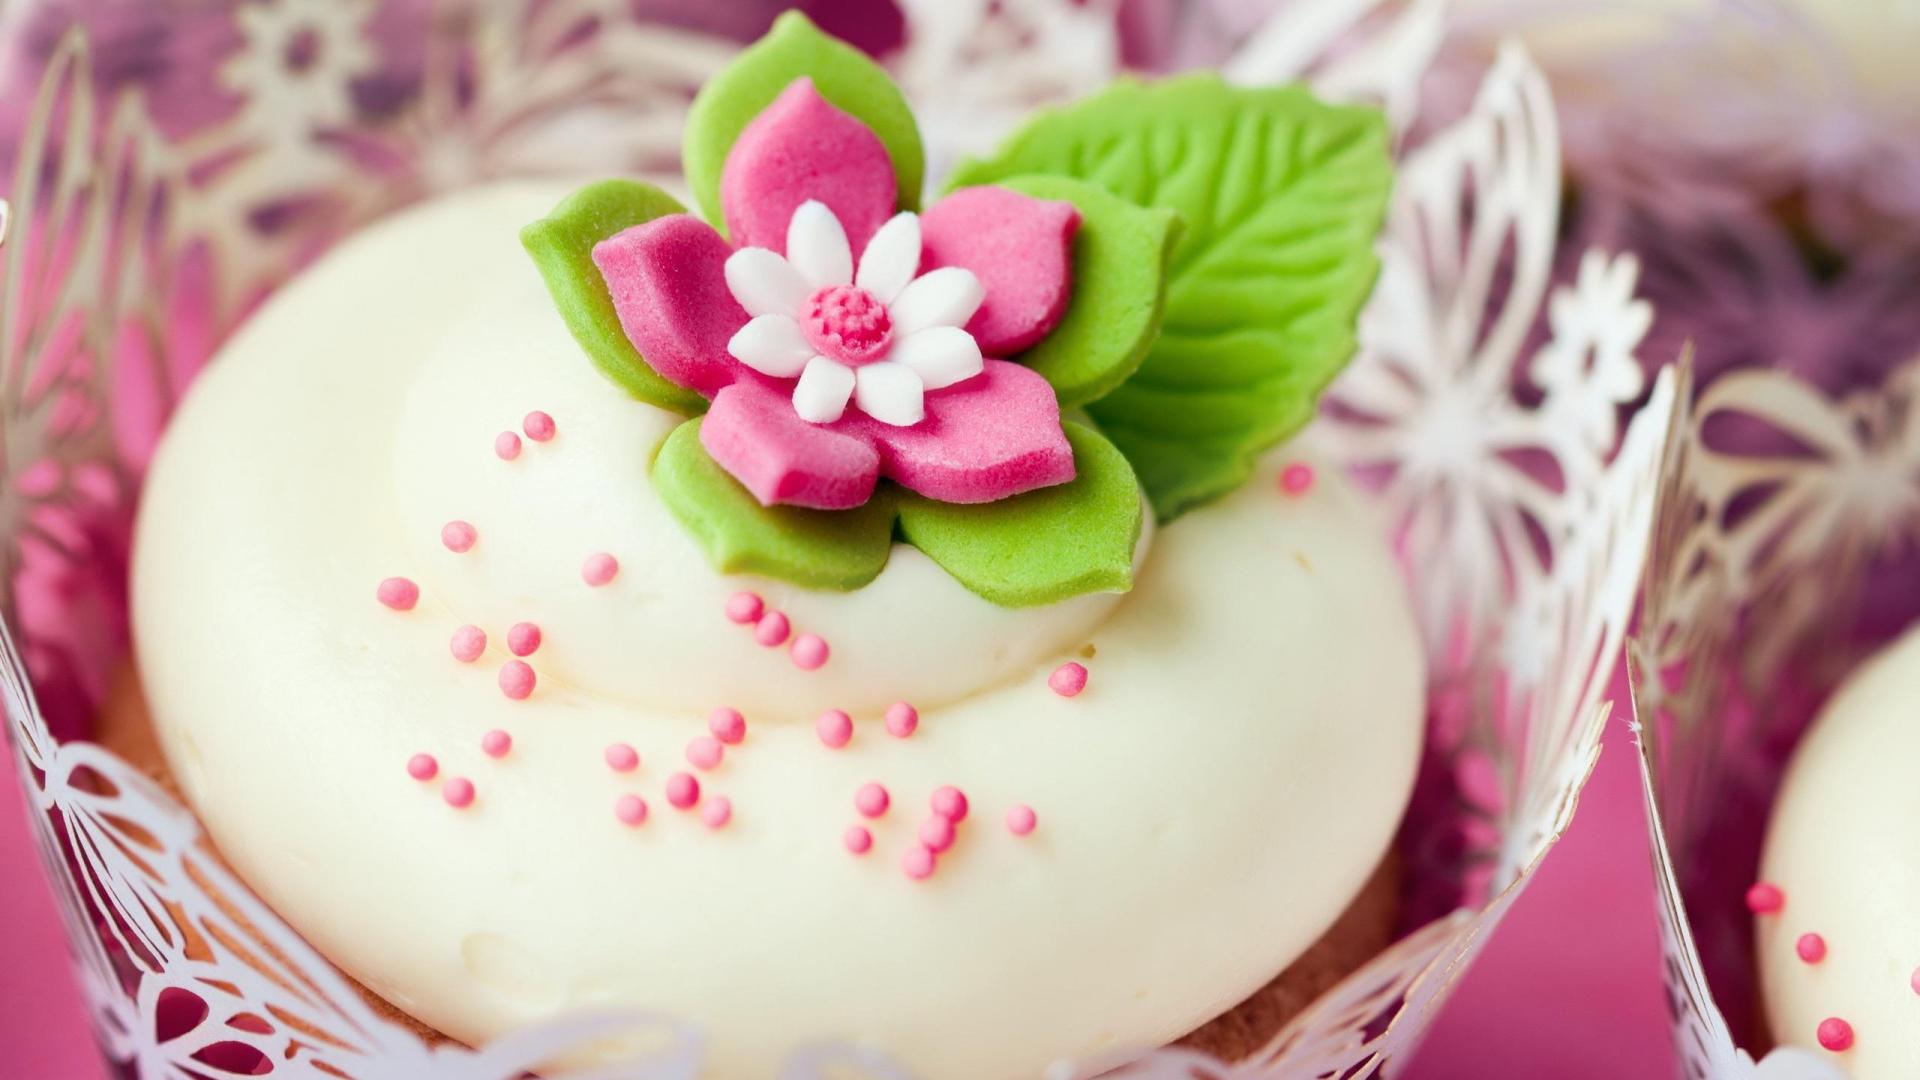 830+ Cake HD Wallpapers and Backgrounds